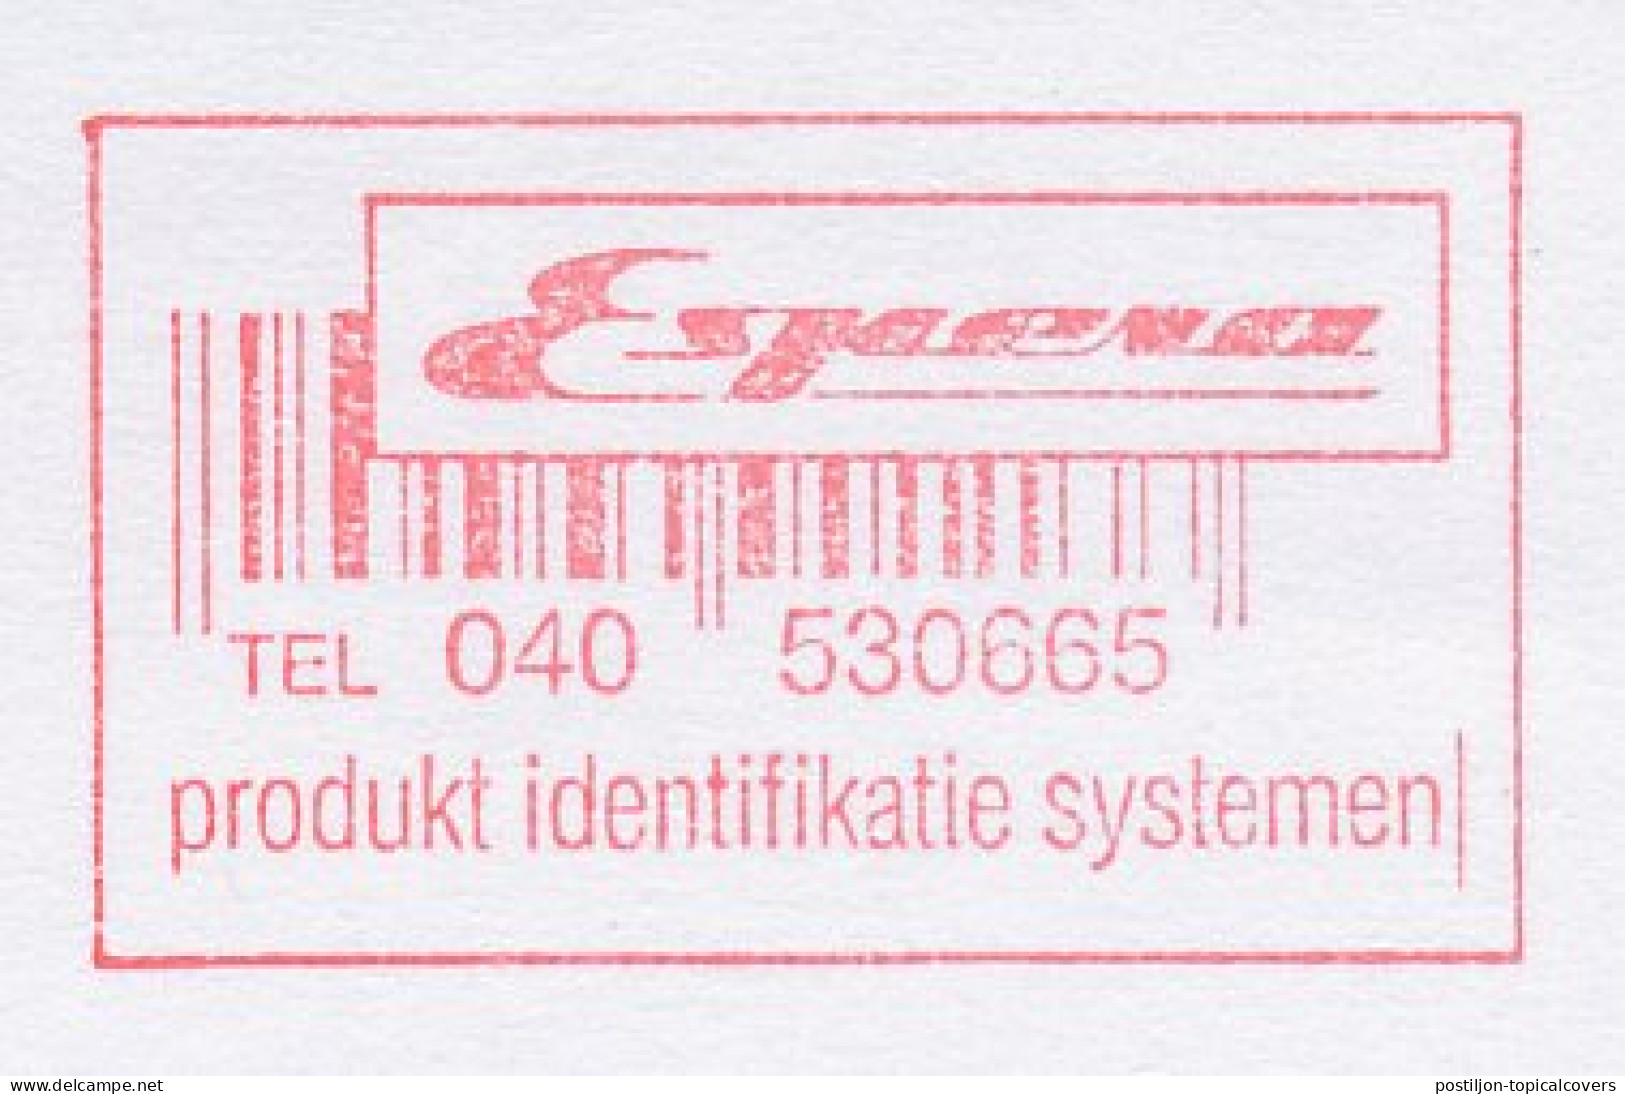 Meter Cut Netherlands 2000 Bar Code - Product Identification Systems - Computers